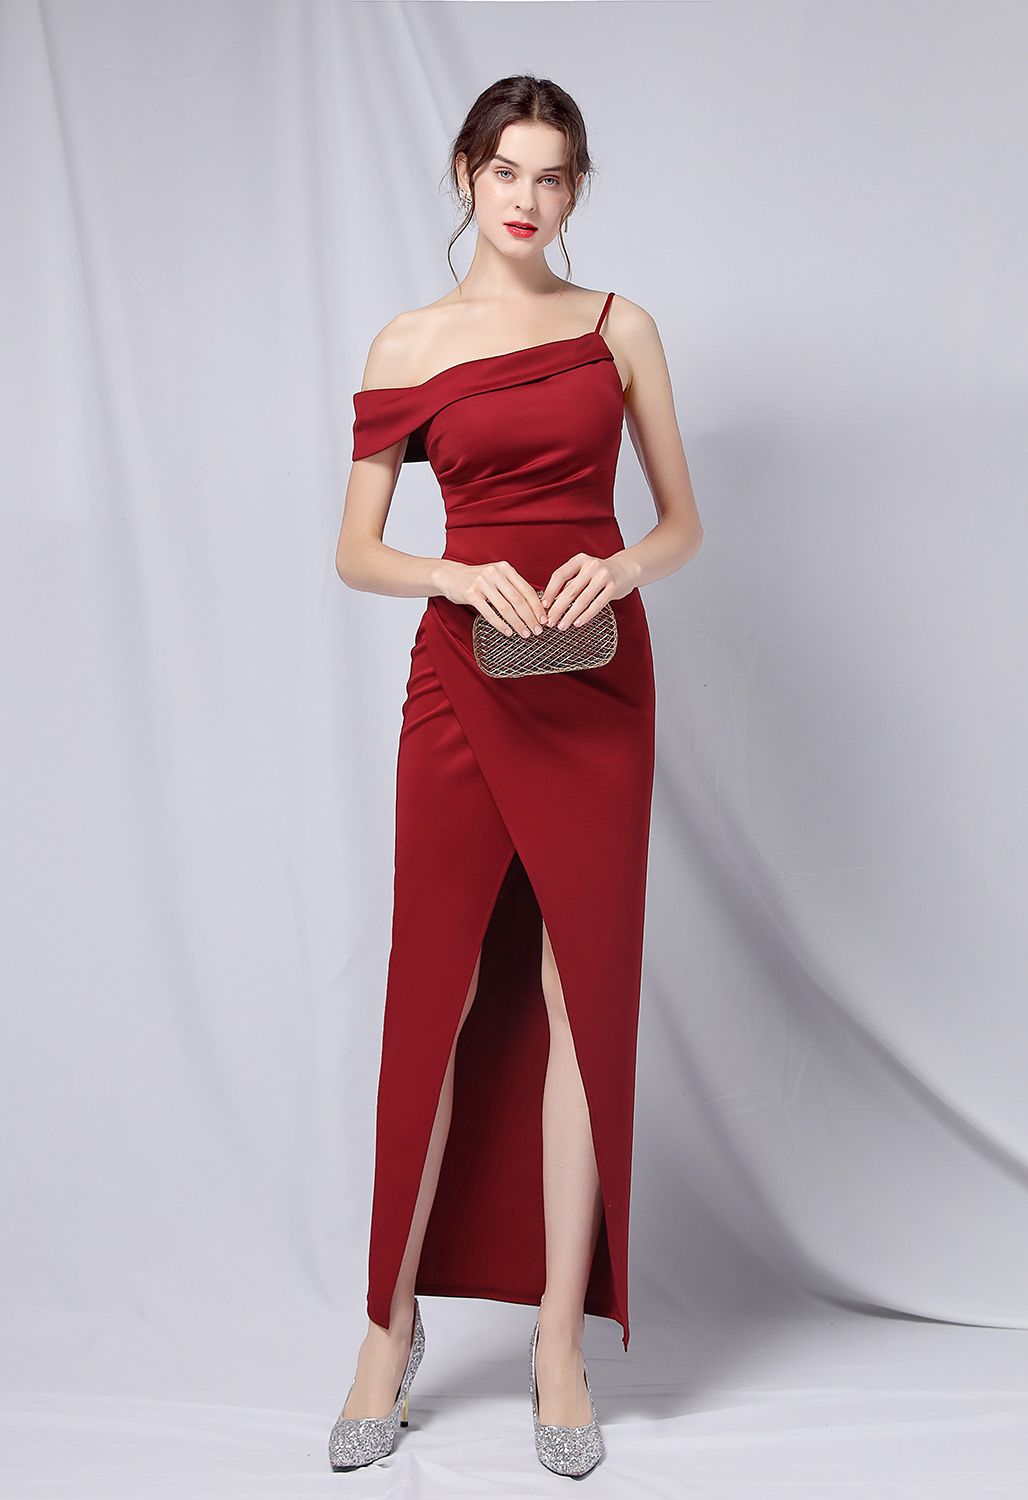 Single Strap Front Slit Gown in Burgundy